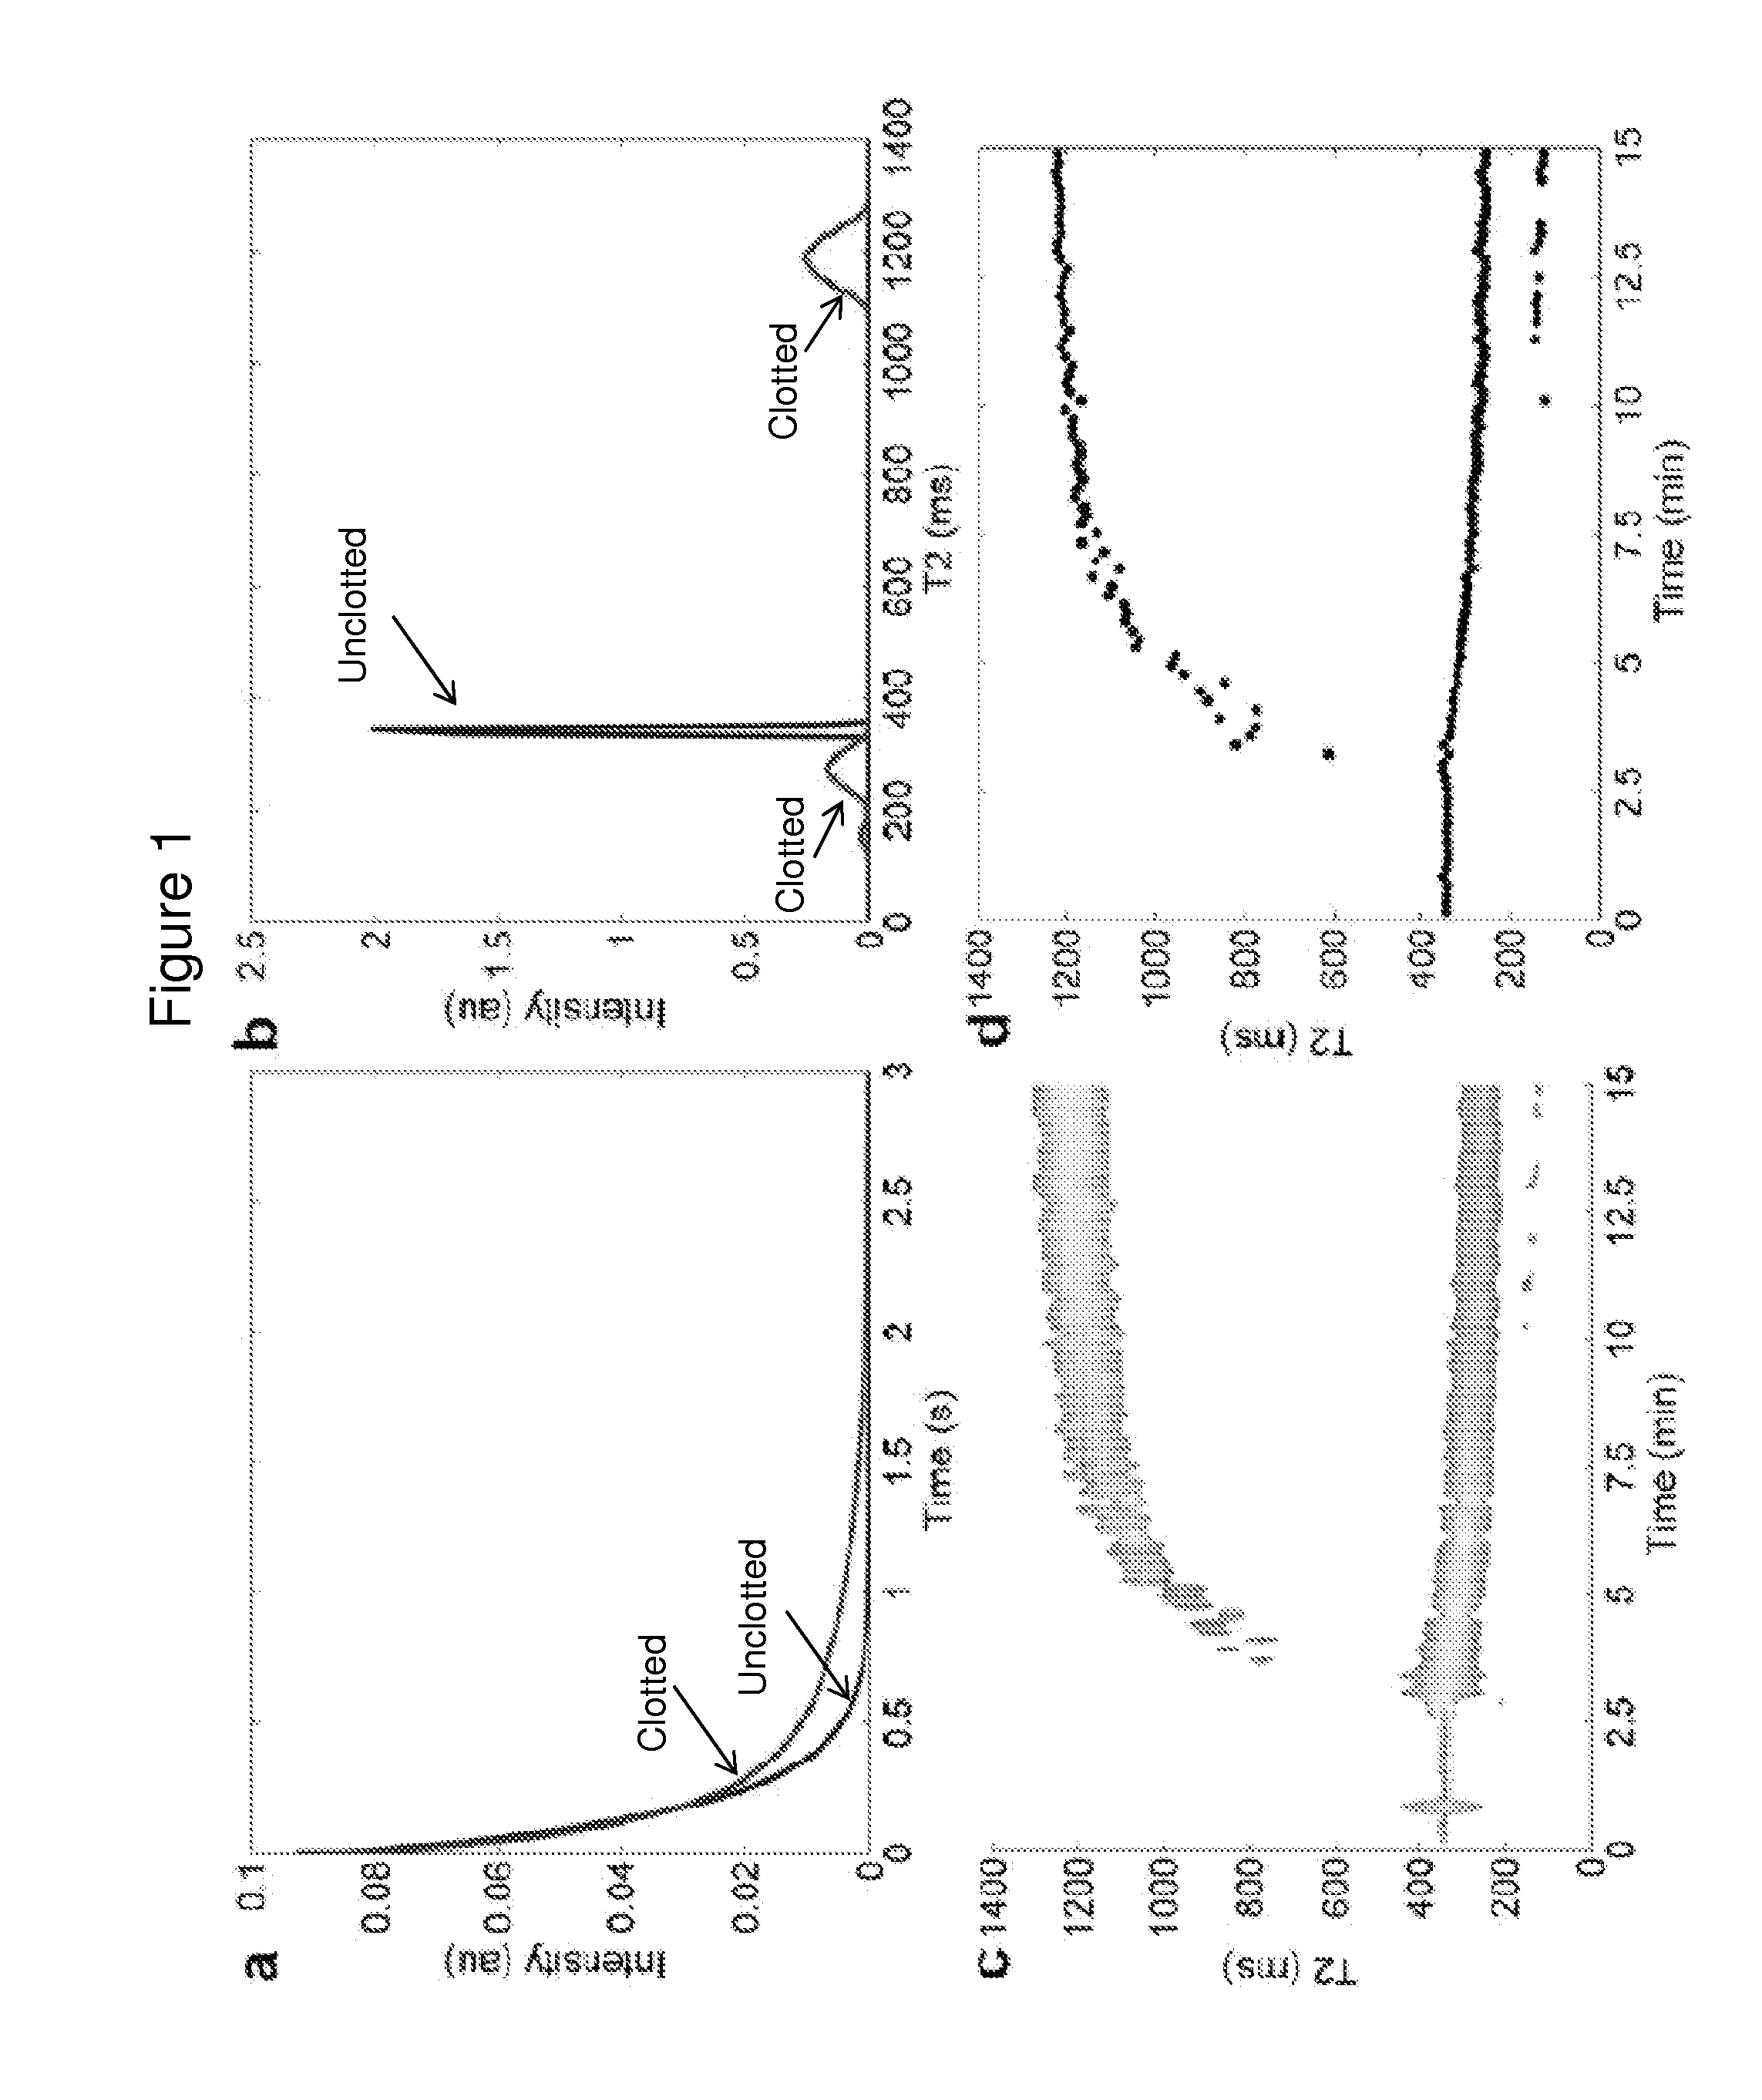 Systems and methods for identifying coagulopathies